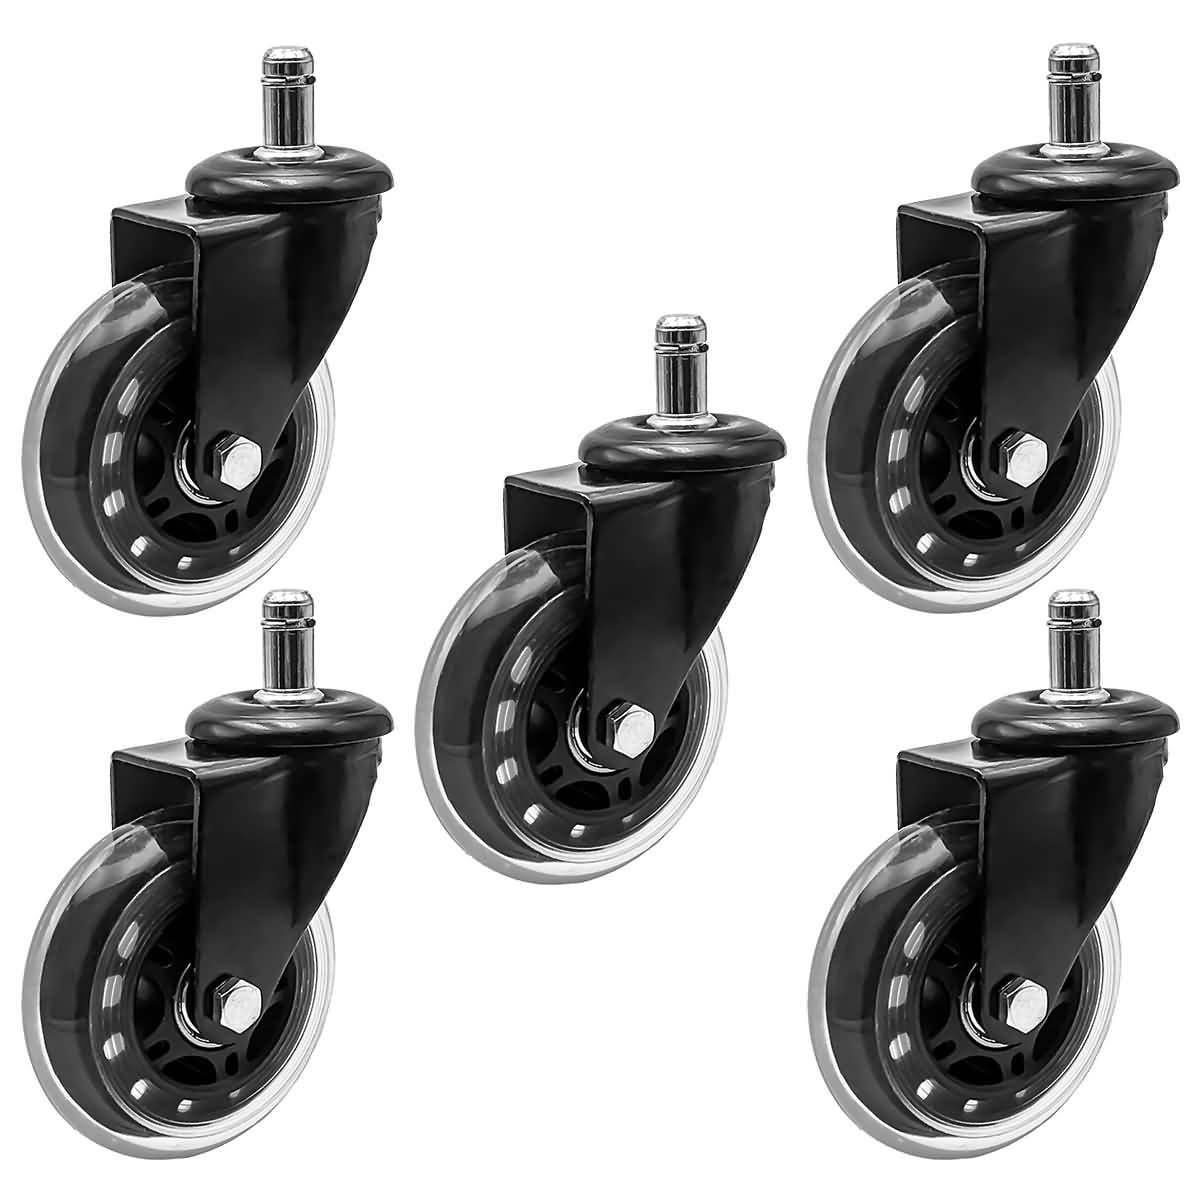 Set of 5 Zitriom Replacement Office Chair caster wheels 7/16" Stem X 2.4" dia 